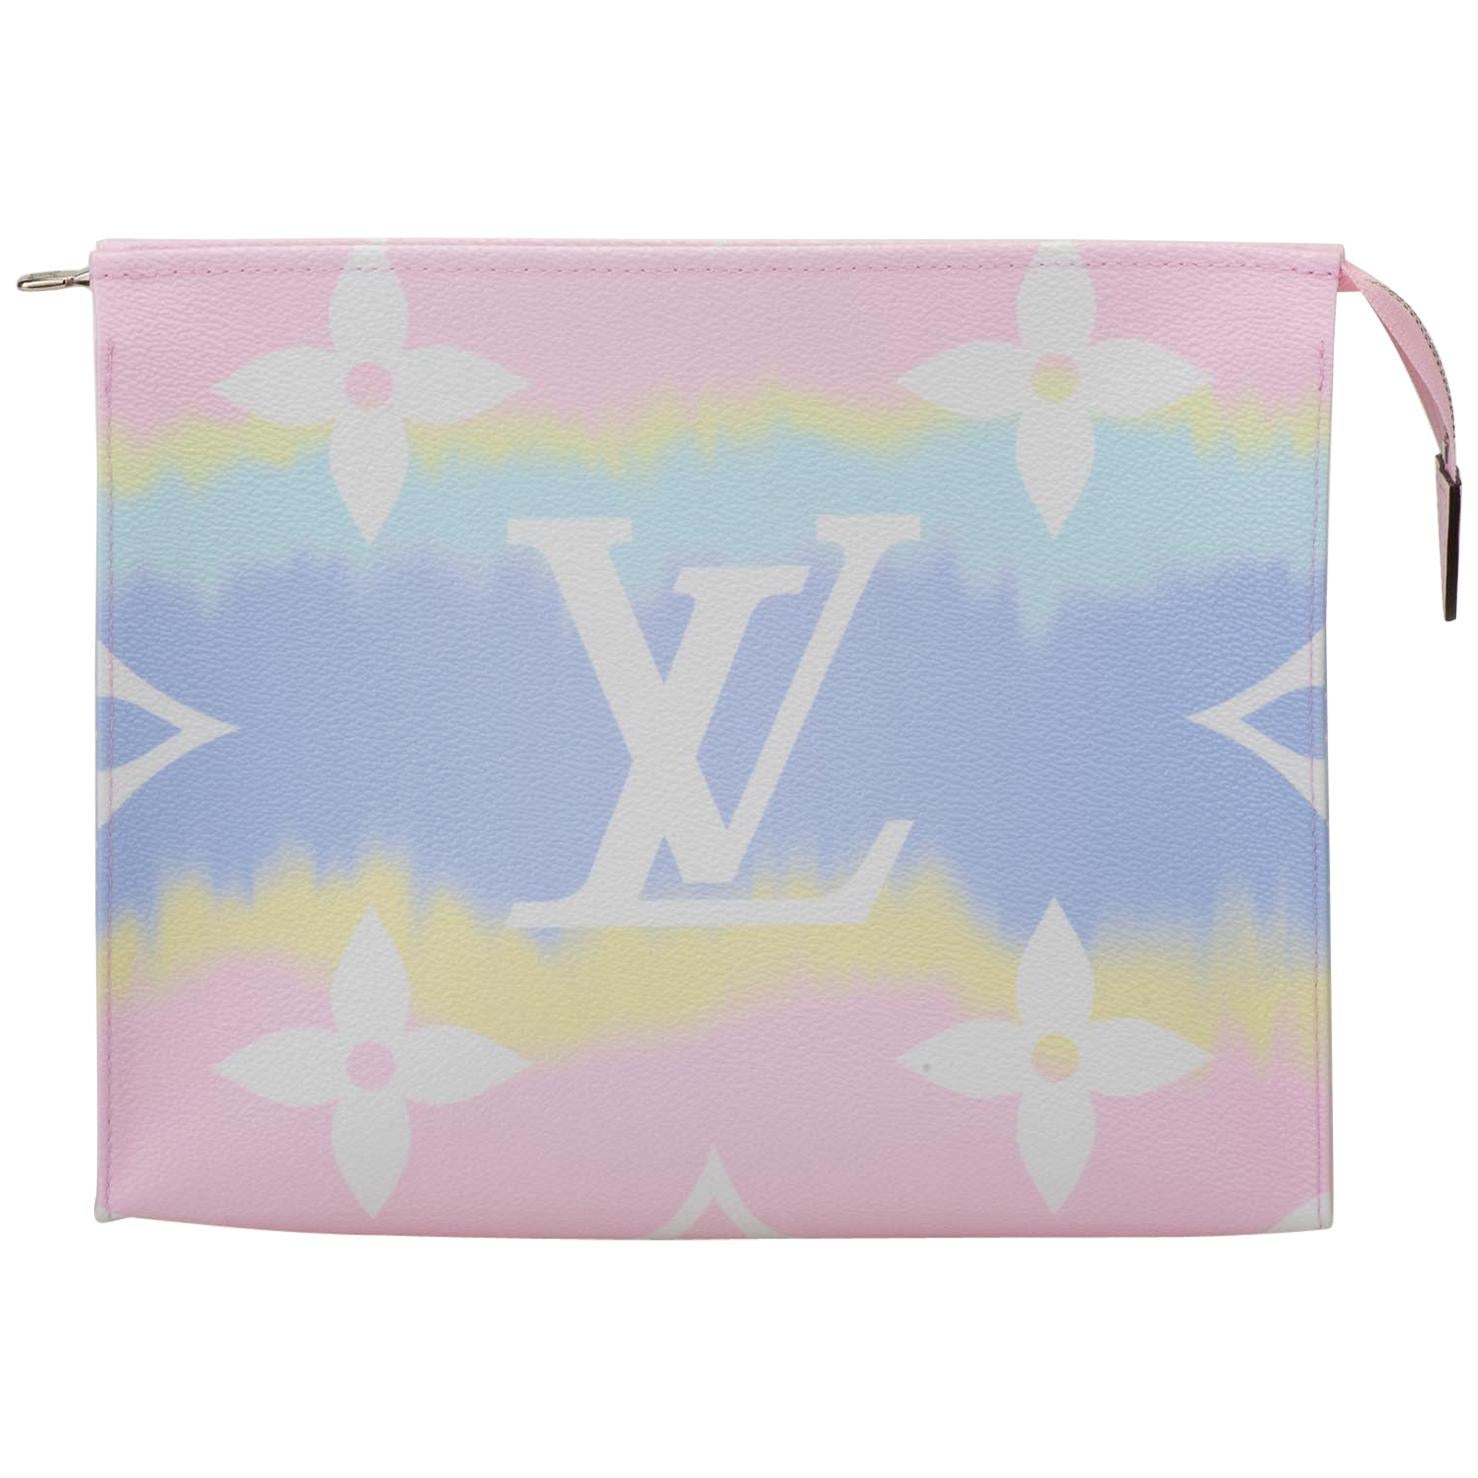 New in Box Louis Vuitton Limited Edition Escale Trousse Pochette Pink 